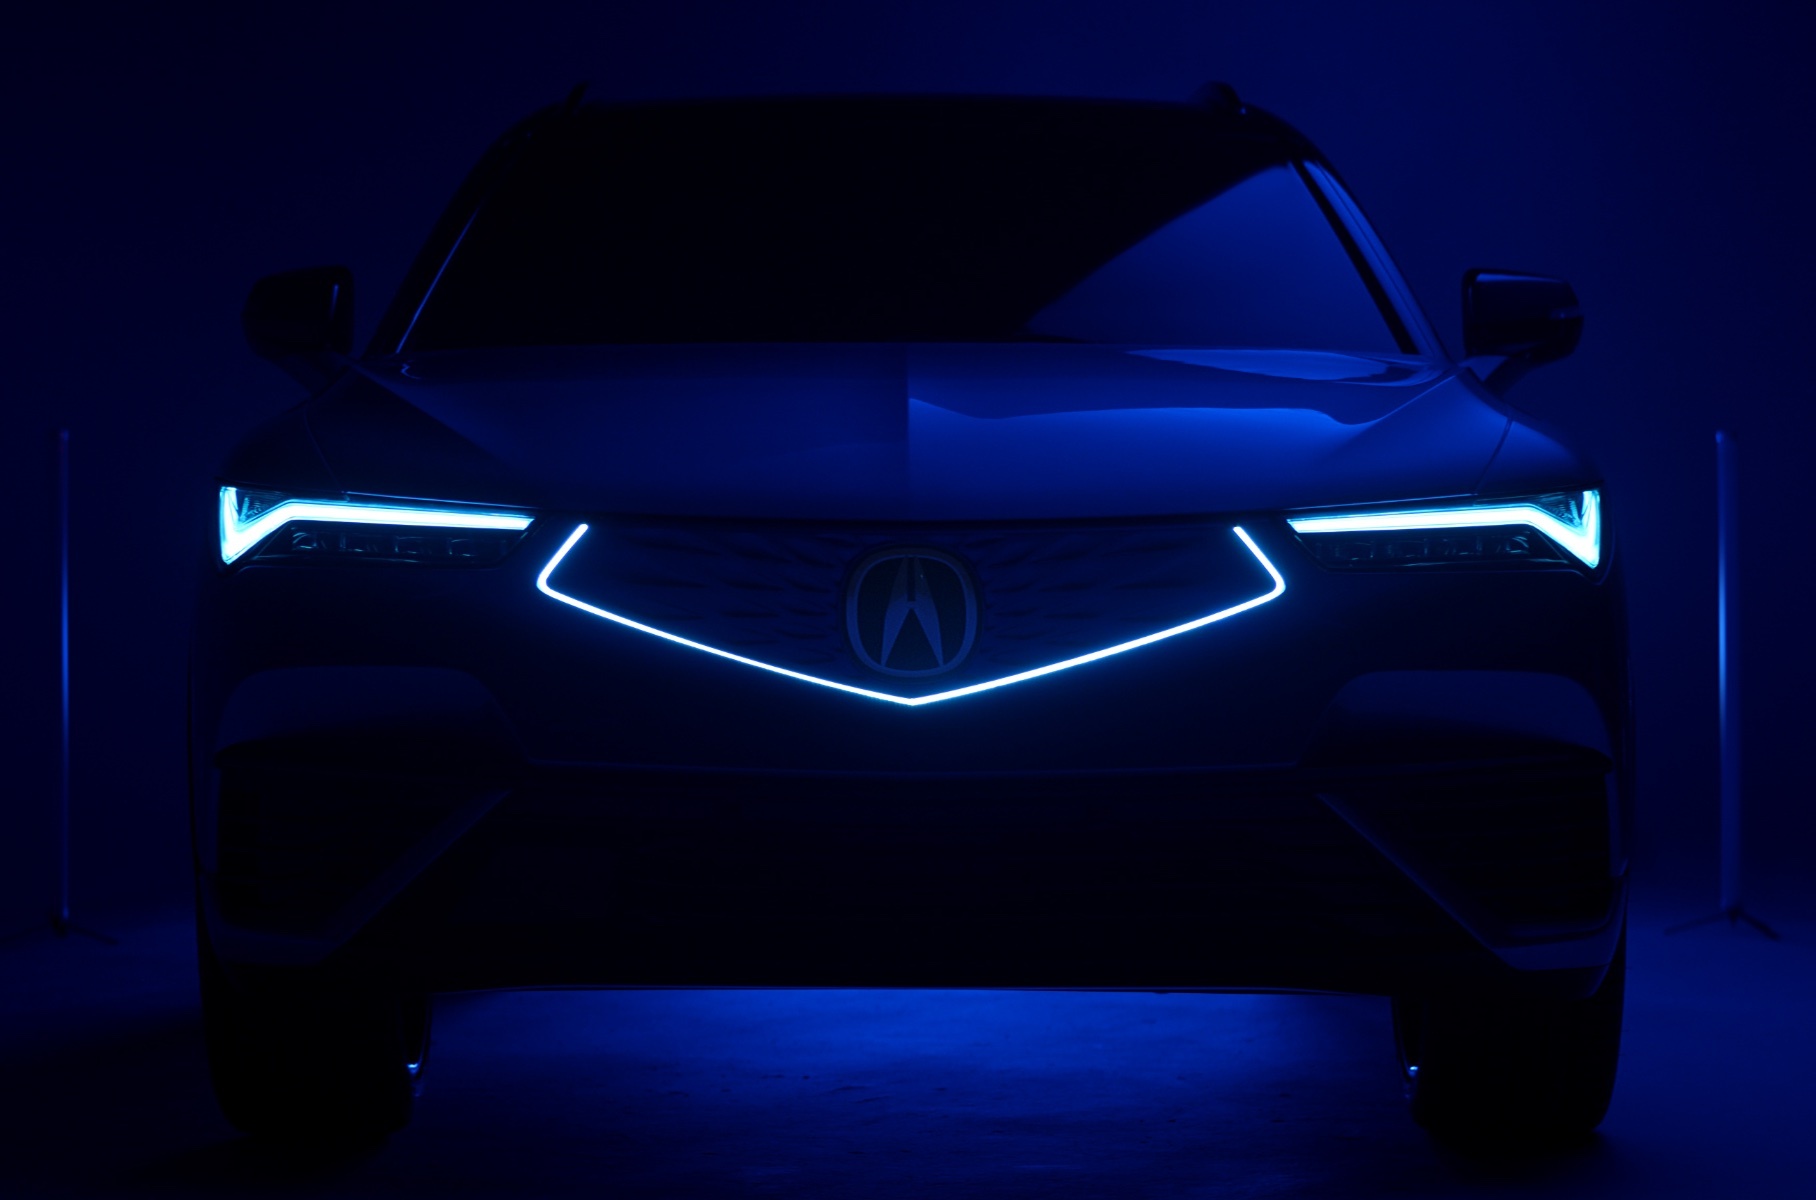 Acura’s first electric model shown on video